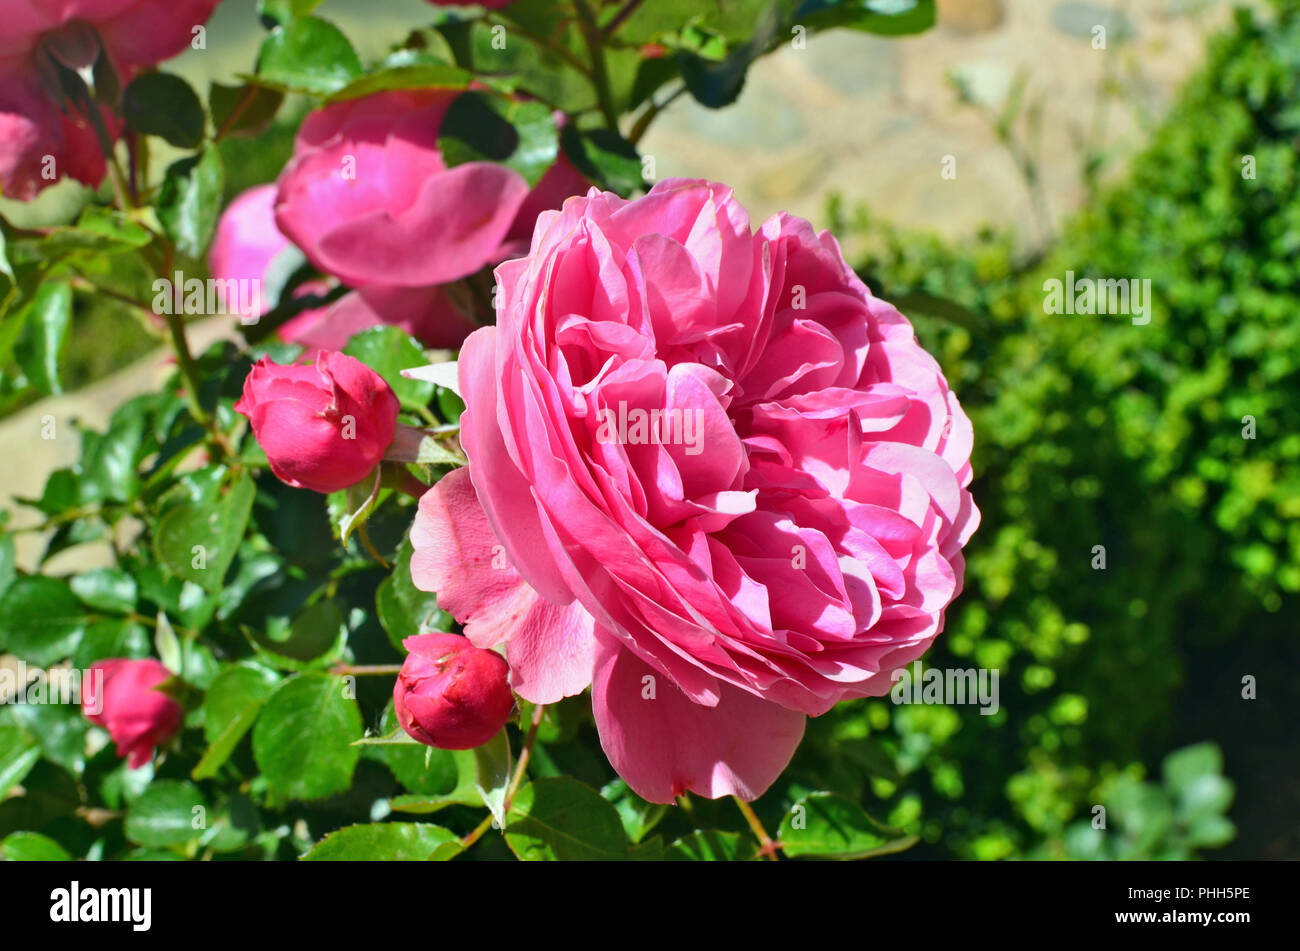 Spring natural background with pink  roses flowers. Stock Photo